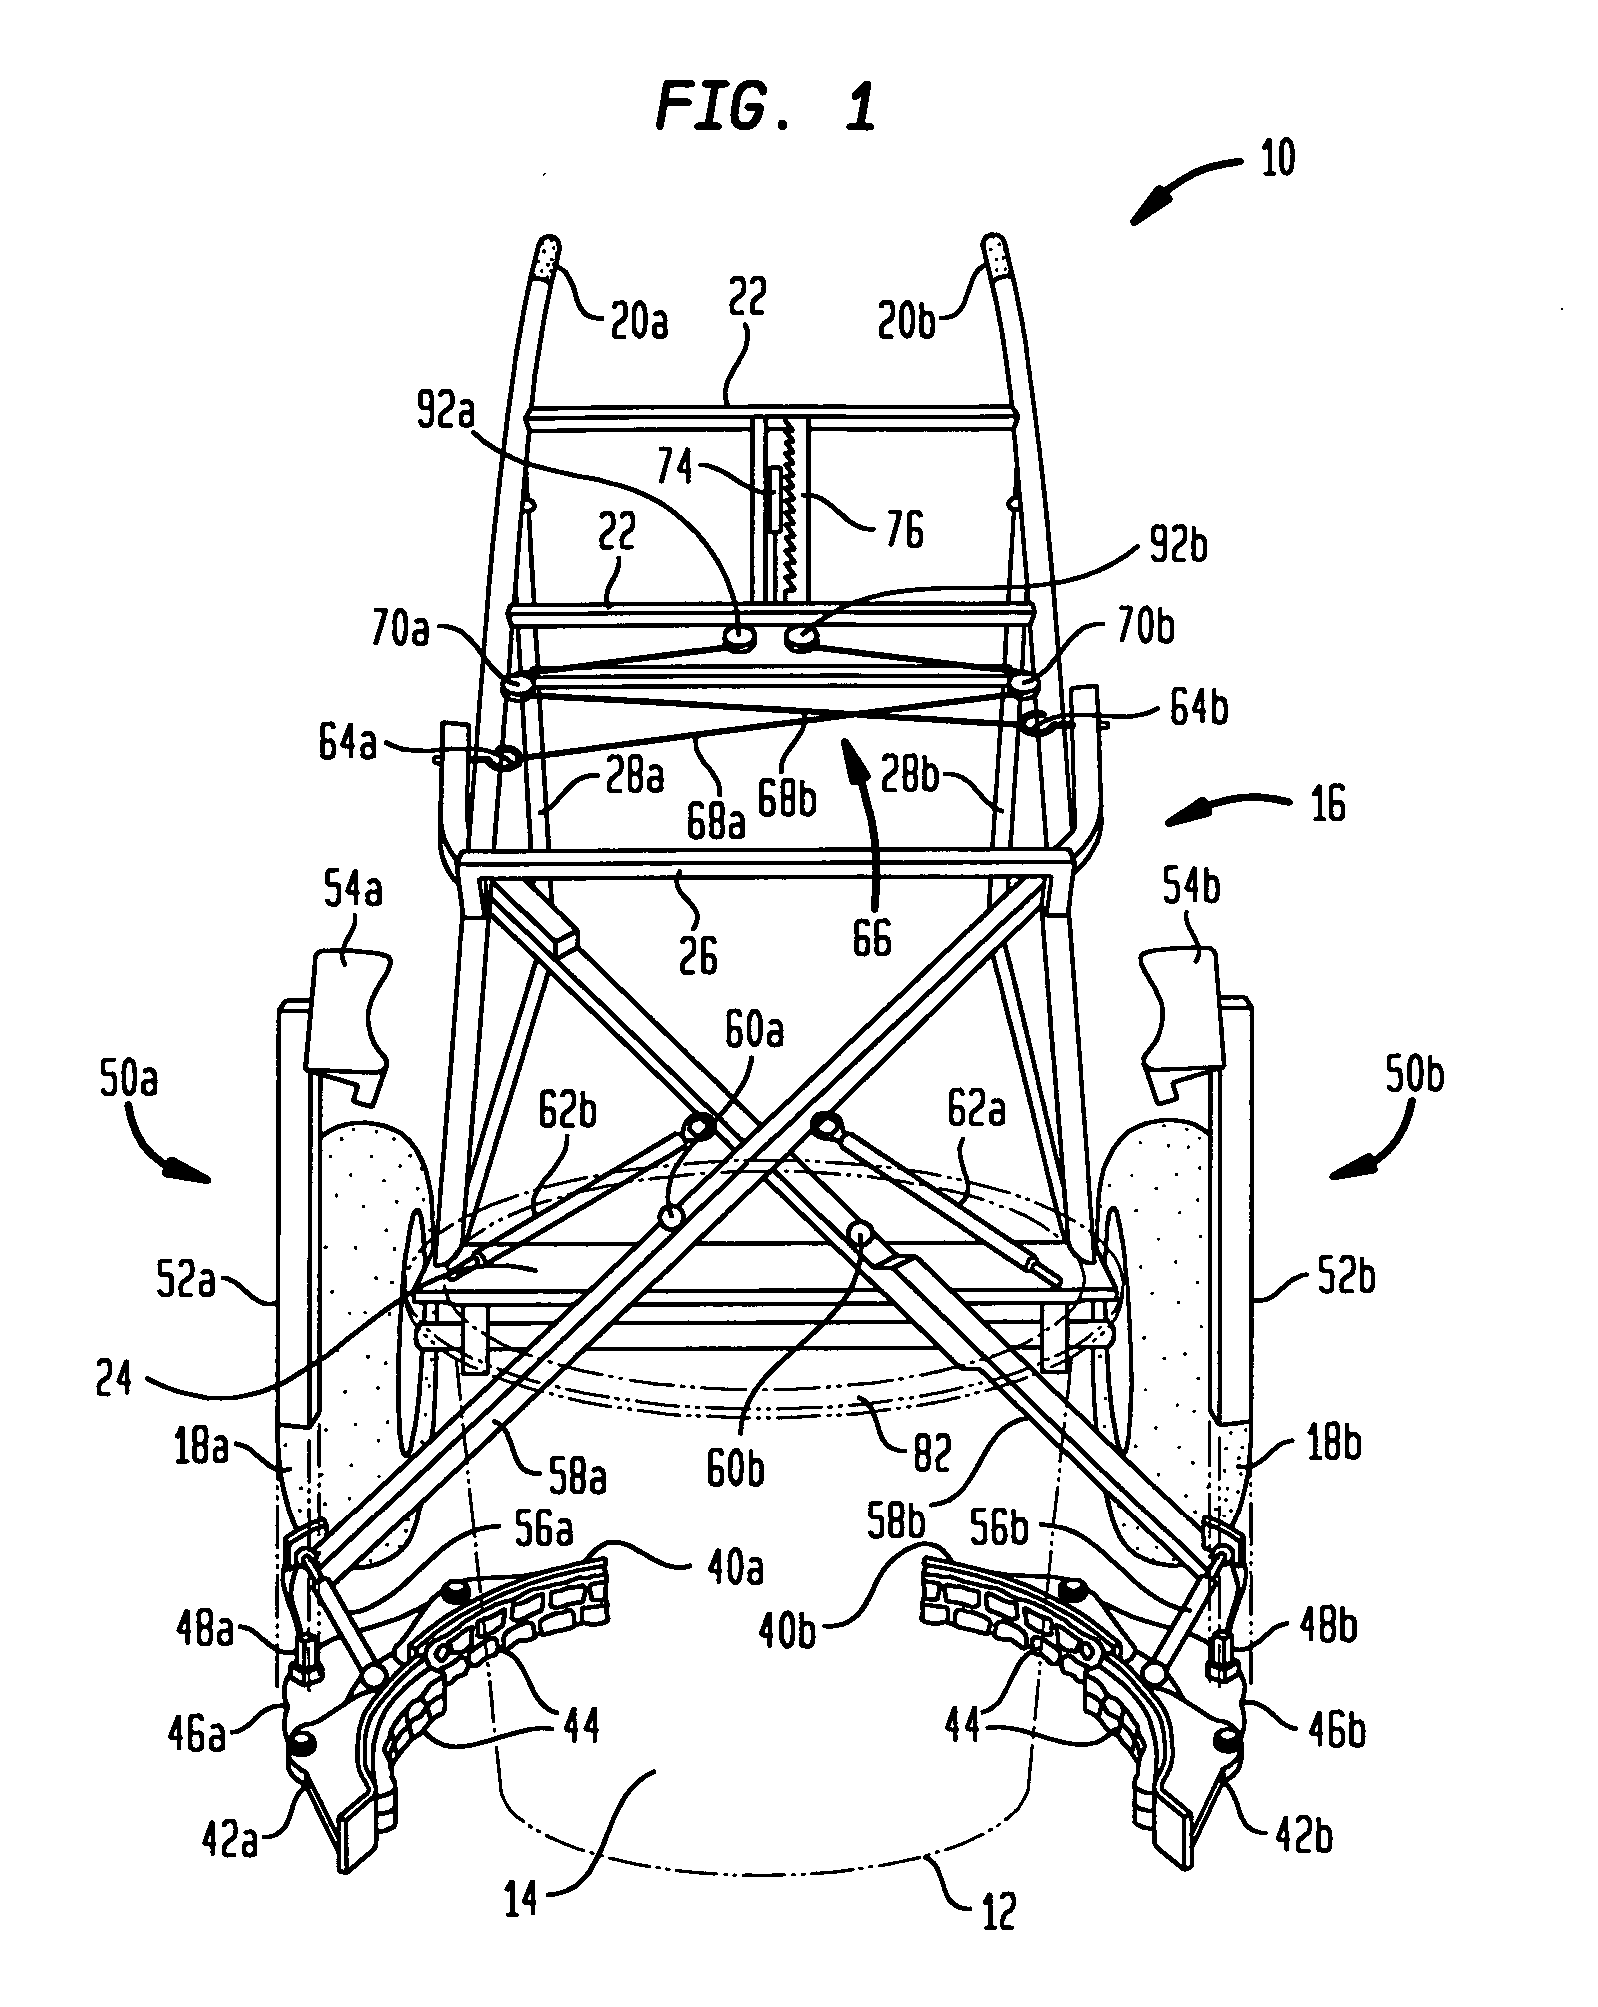 Hand cart for lifting and moving round containers